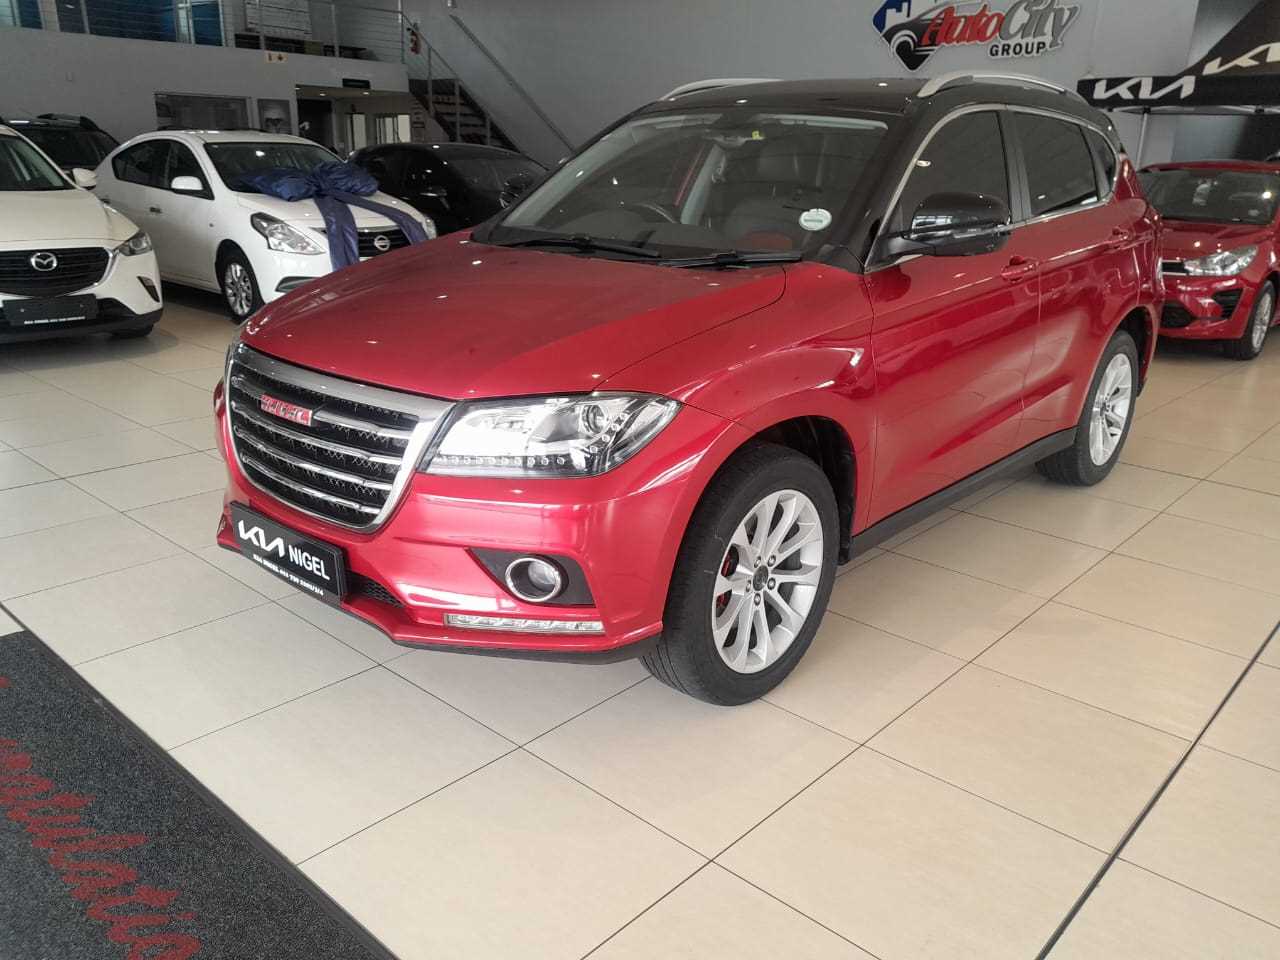 2019 Haval H2 1.5T 6MT 4X2 Luxury for sale - 337492